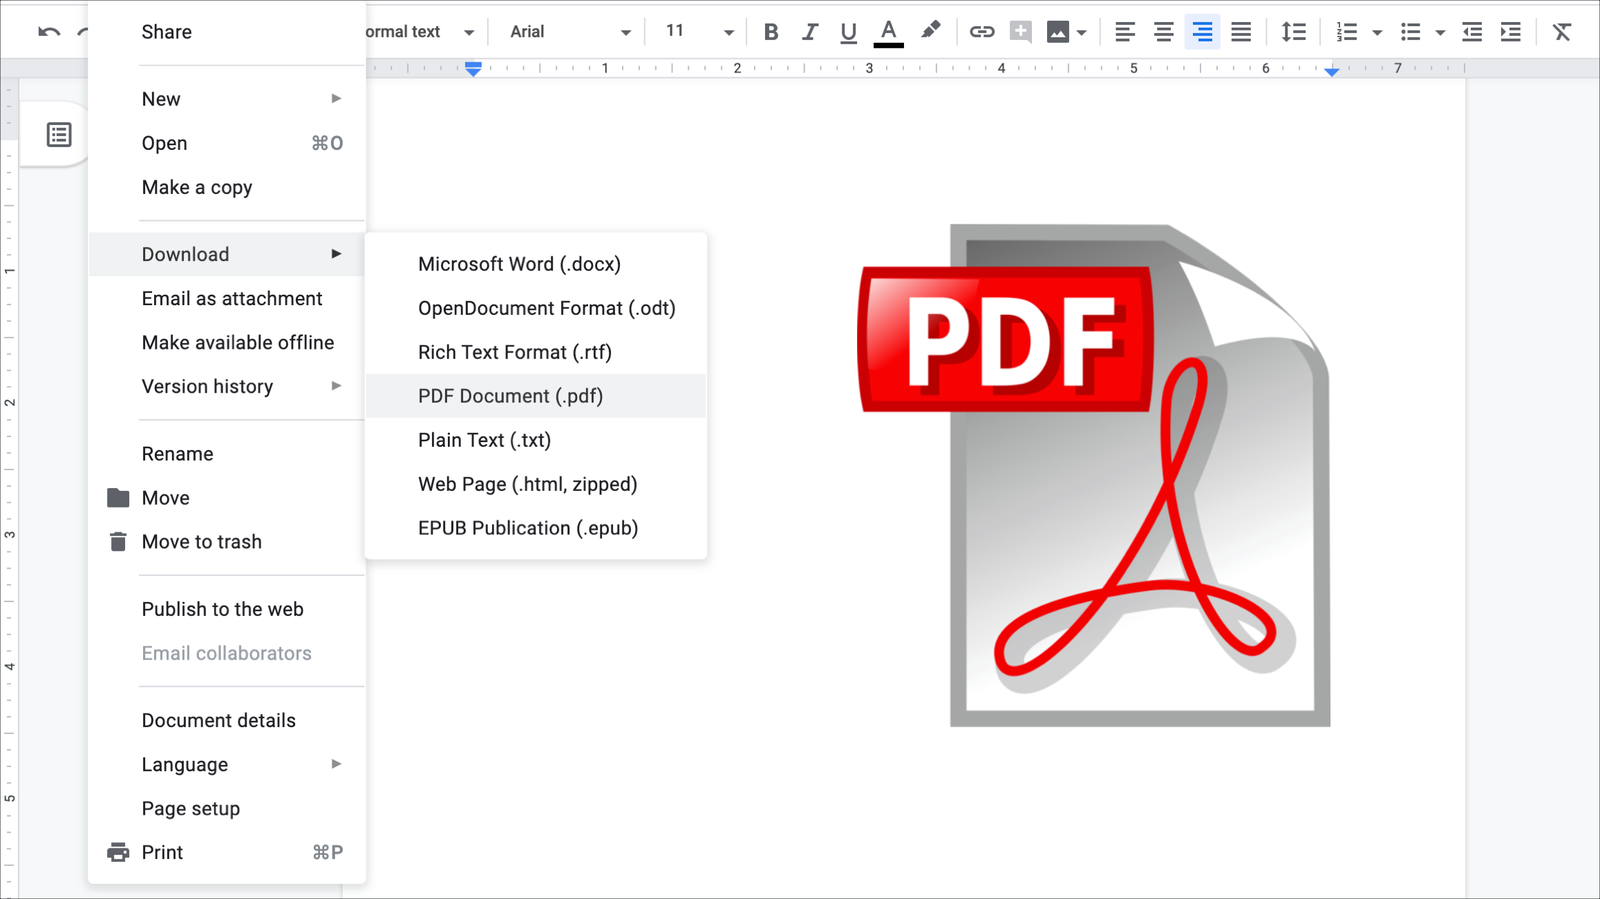 How to create a PDF from a document in Google Docs | Chrome Geek